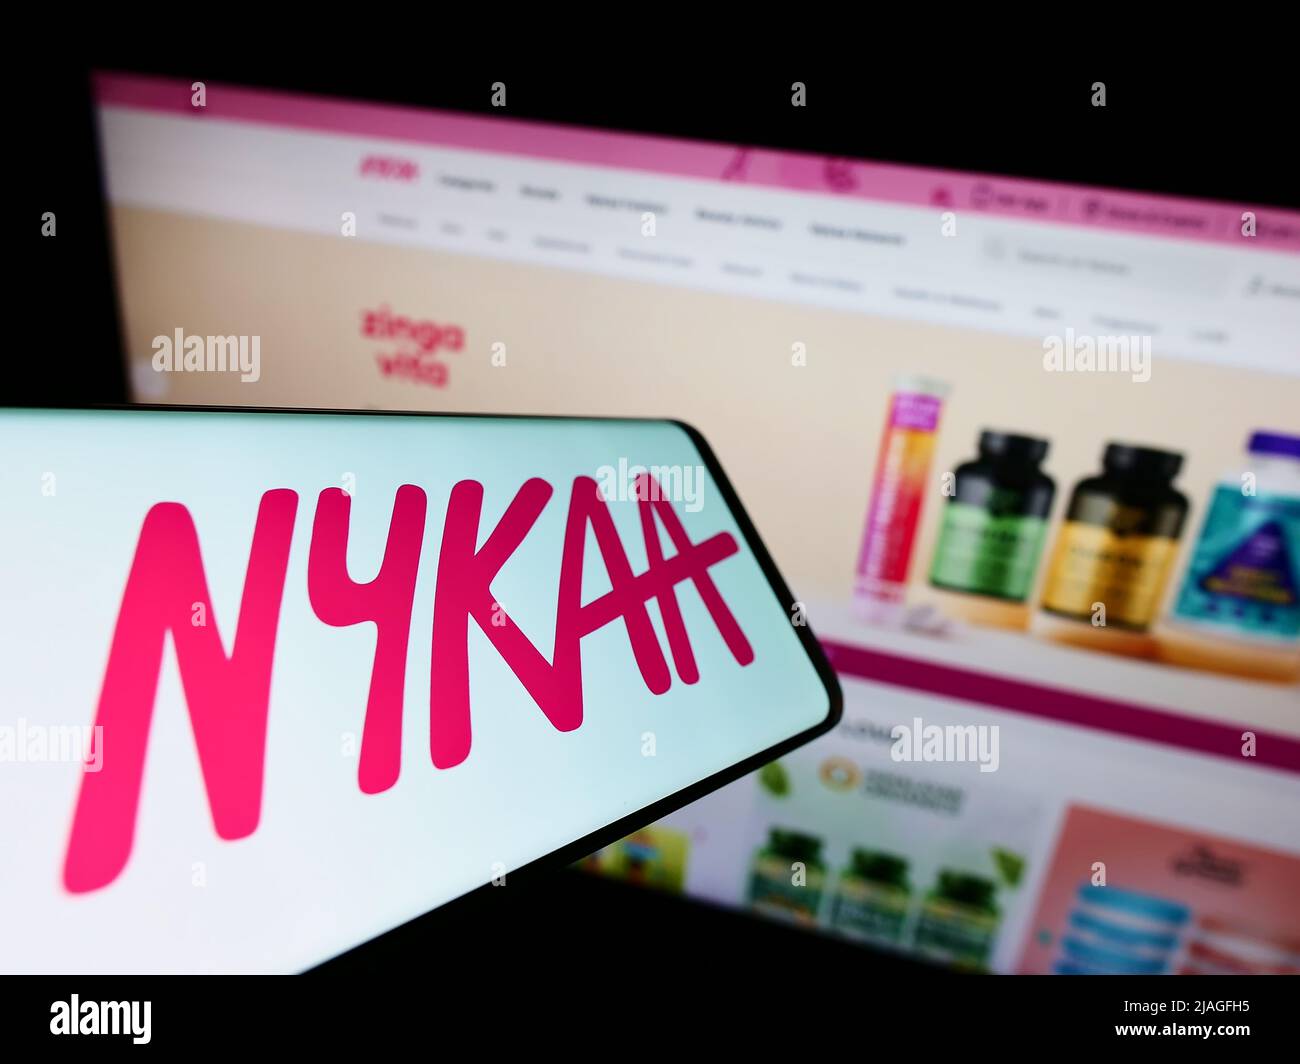 Mobile phone with logo of e-commerce company Nykaa E-Retail Pvt. Ltd. on screen in front of website. Focus on center-right of phone display. Stock Photo